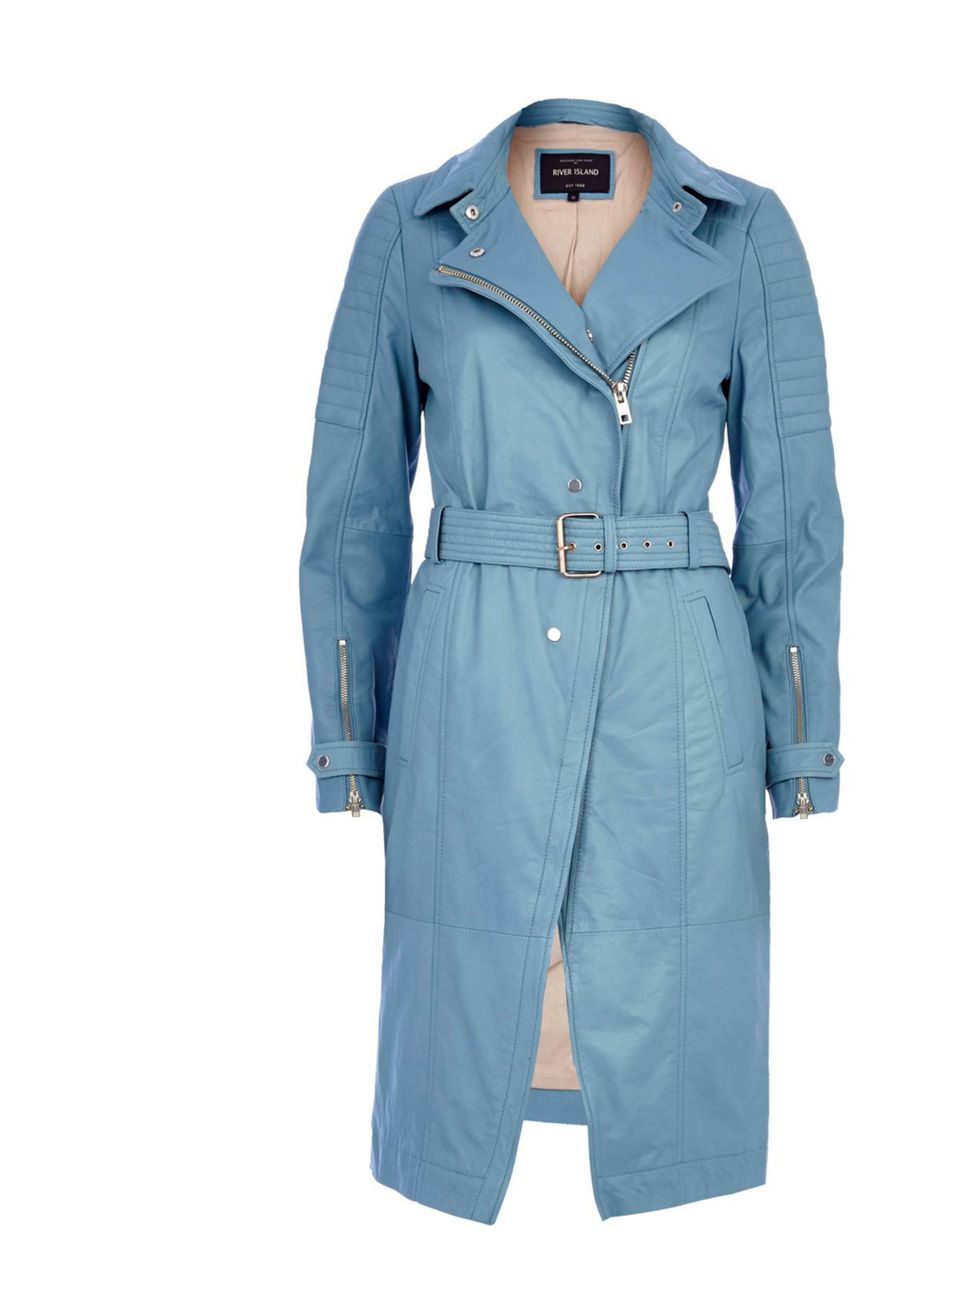 <p>£220<a href="http://www.riverisland.com/women/coats--jackets/leather-jackets/Blue-leather-trench-coat-646074">River Island</a></p>